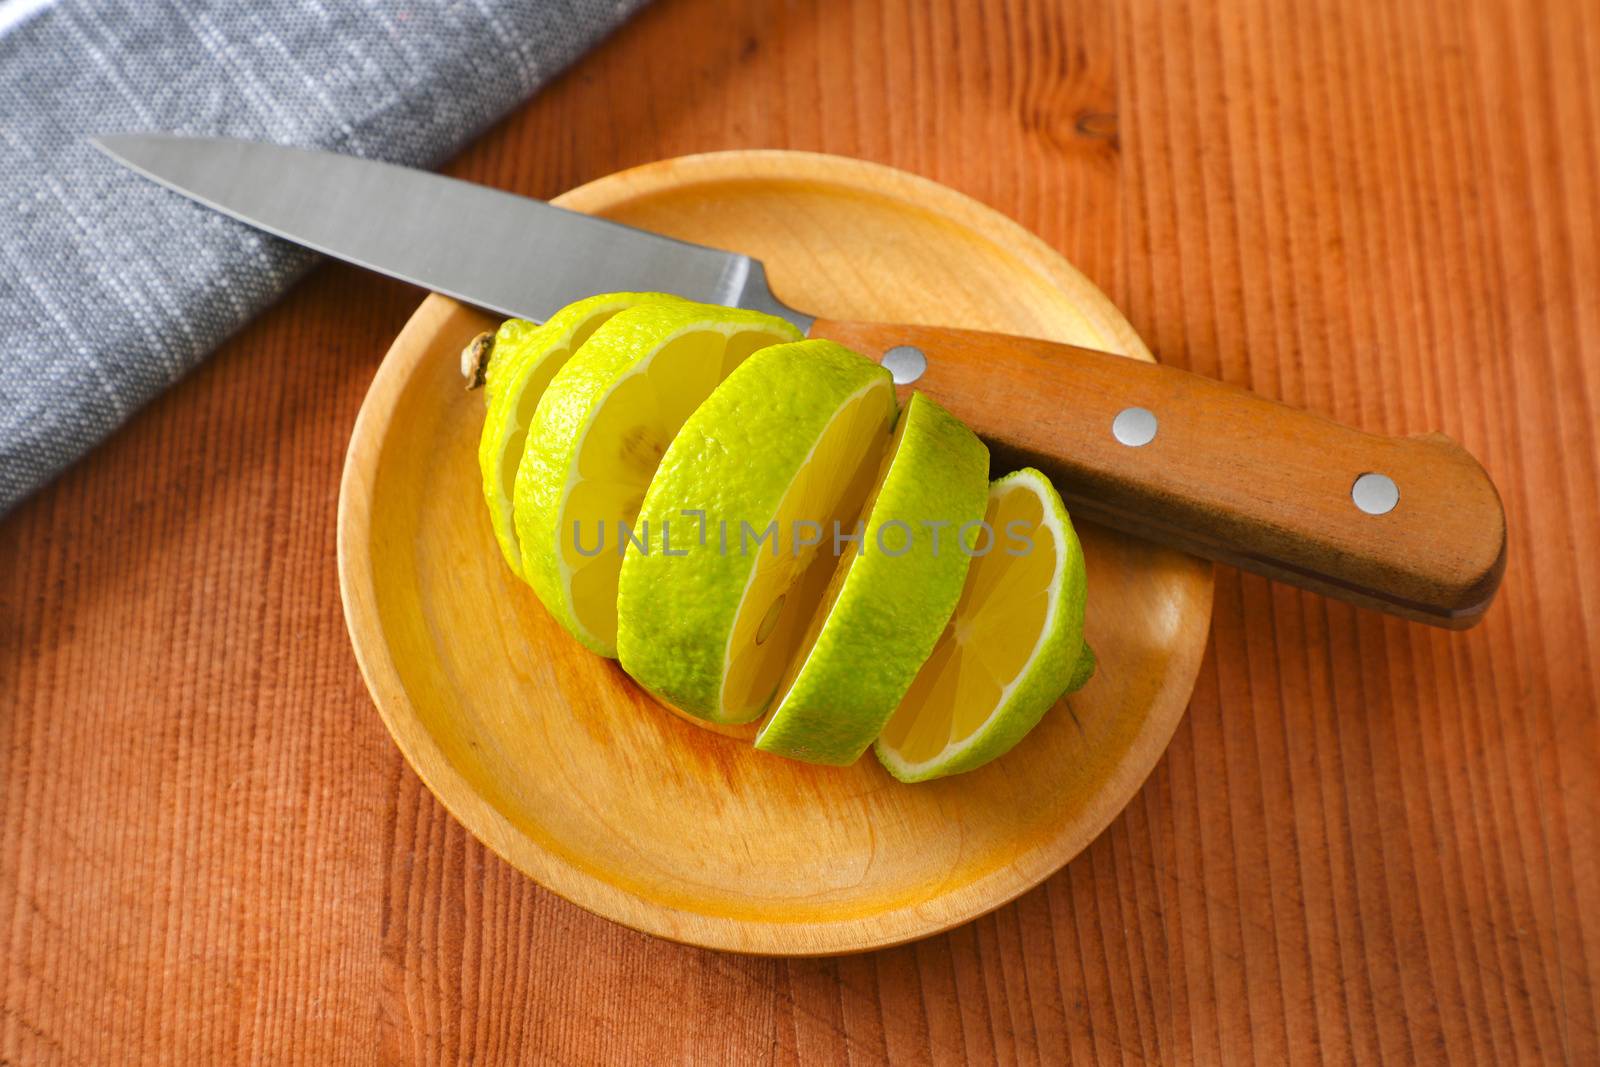 Lemon with green peel and yellow flesh, sliced on wooden plate